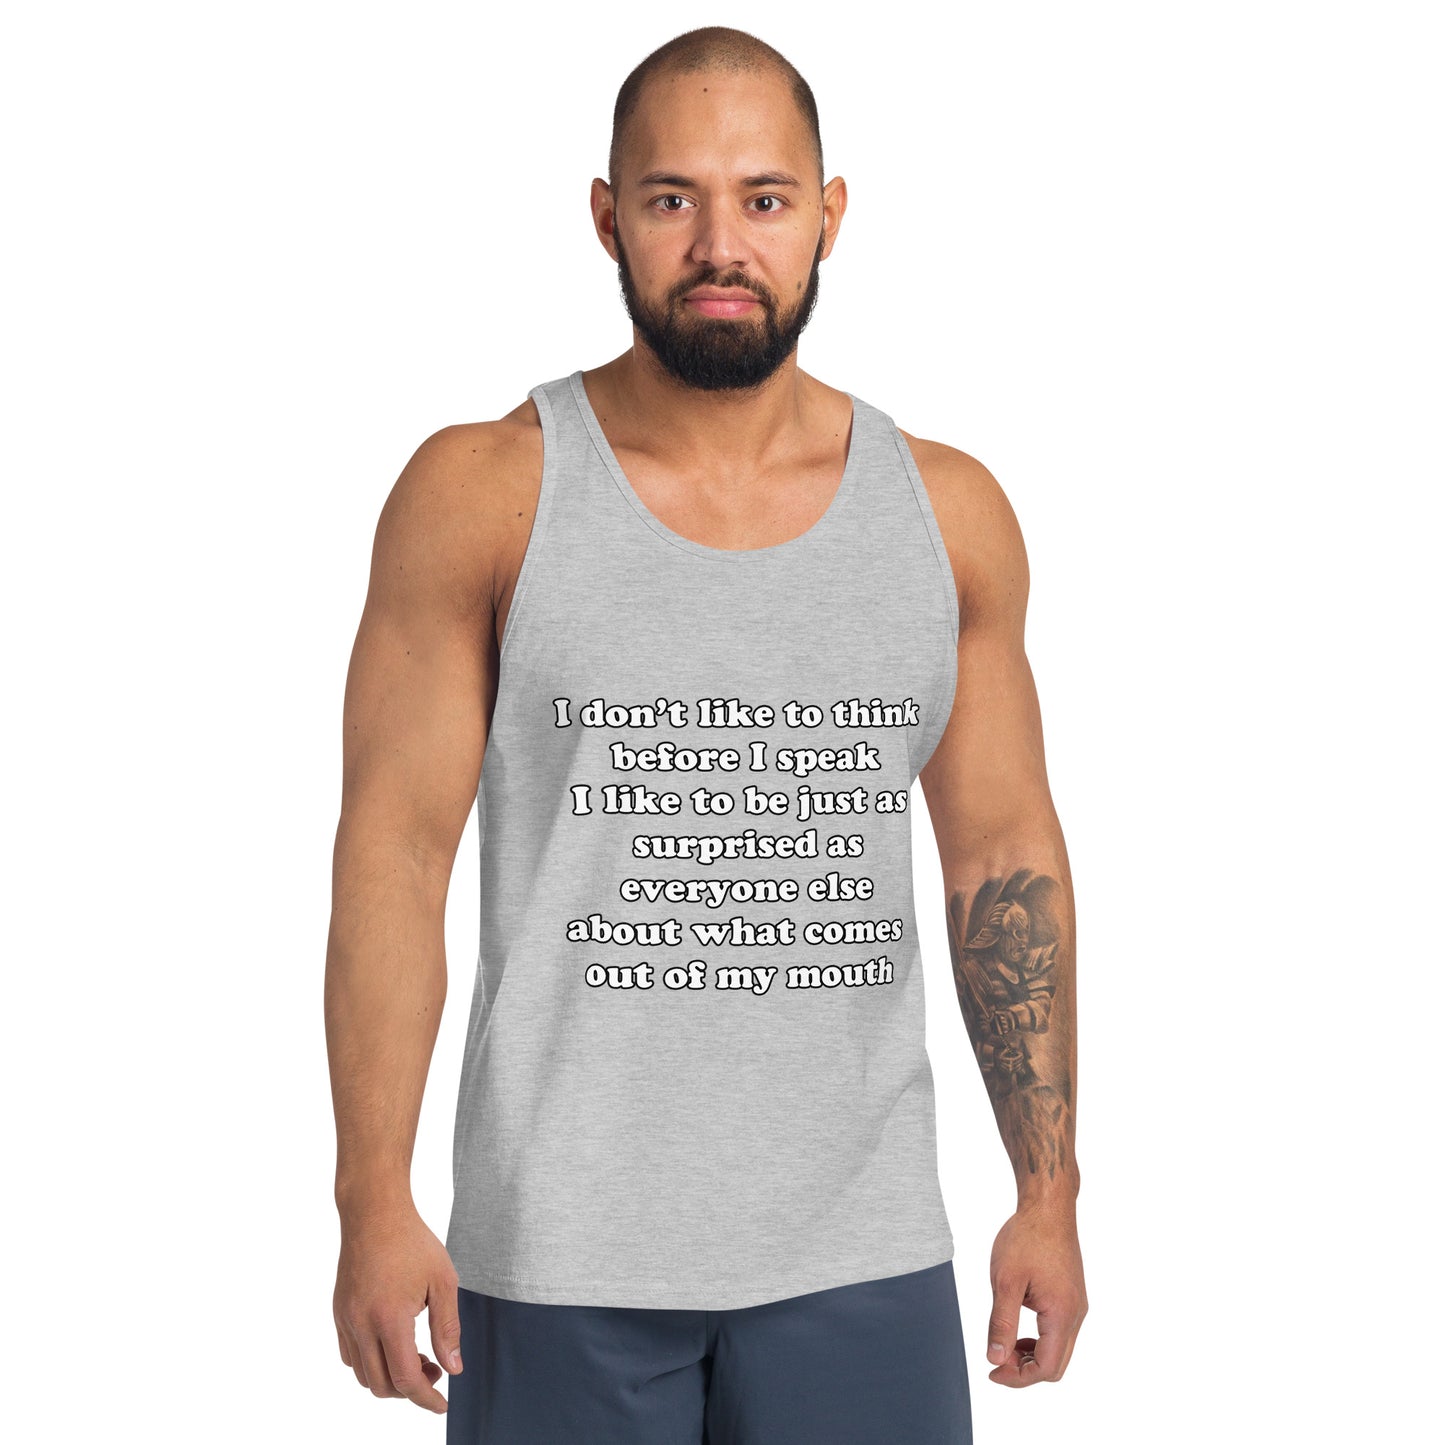 Man with grey tank top with text “I don't think before I speak Just as serprised as everyone about what comes out of my mouth"